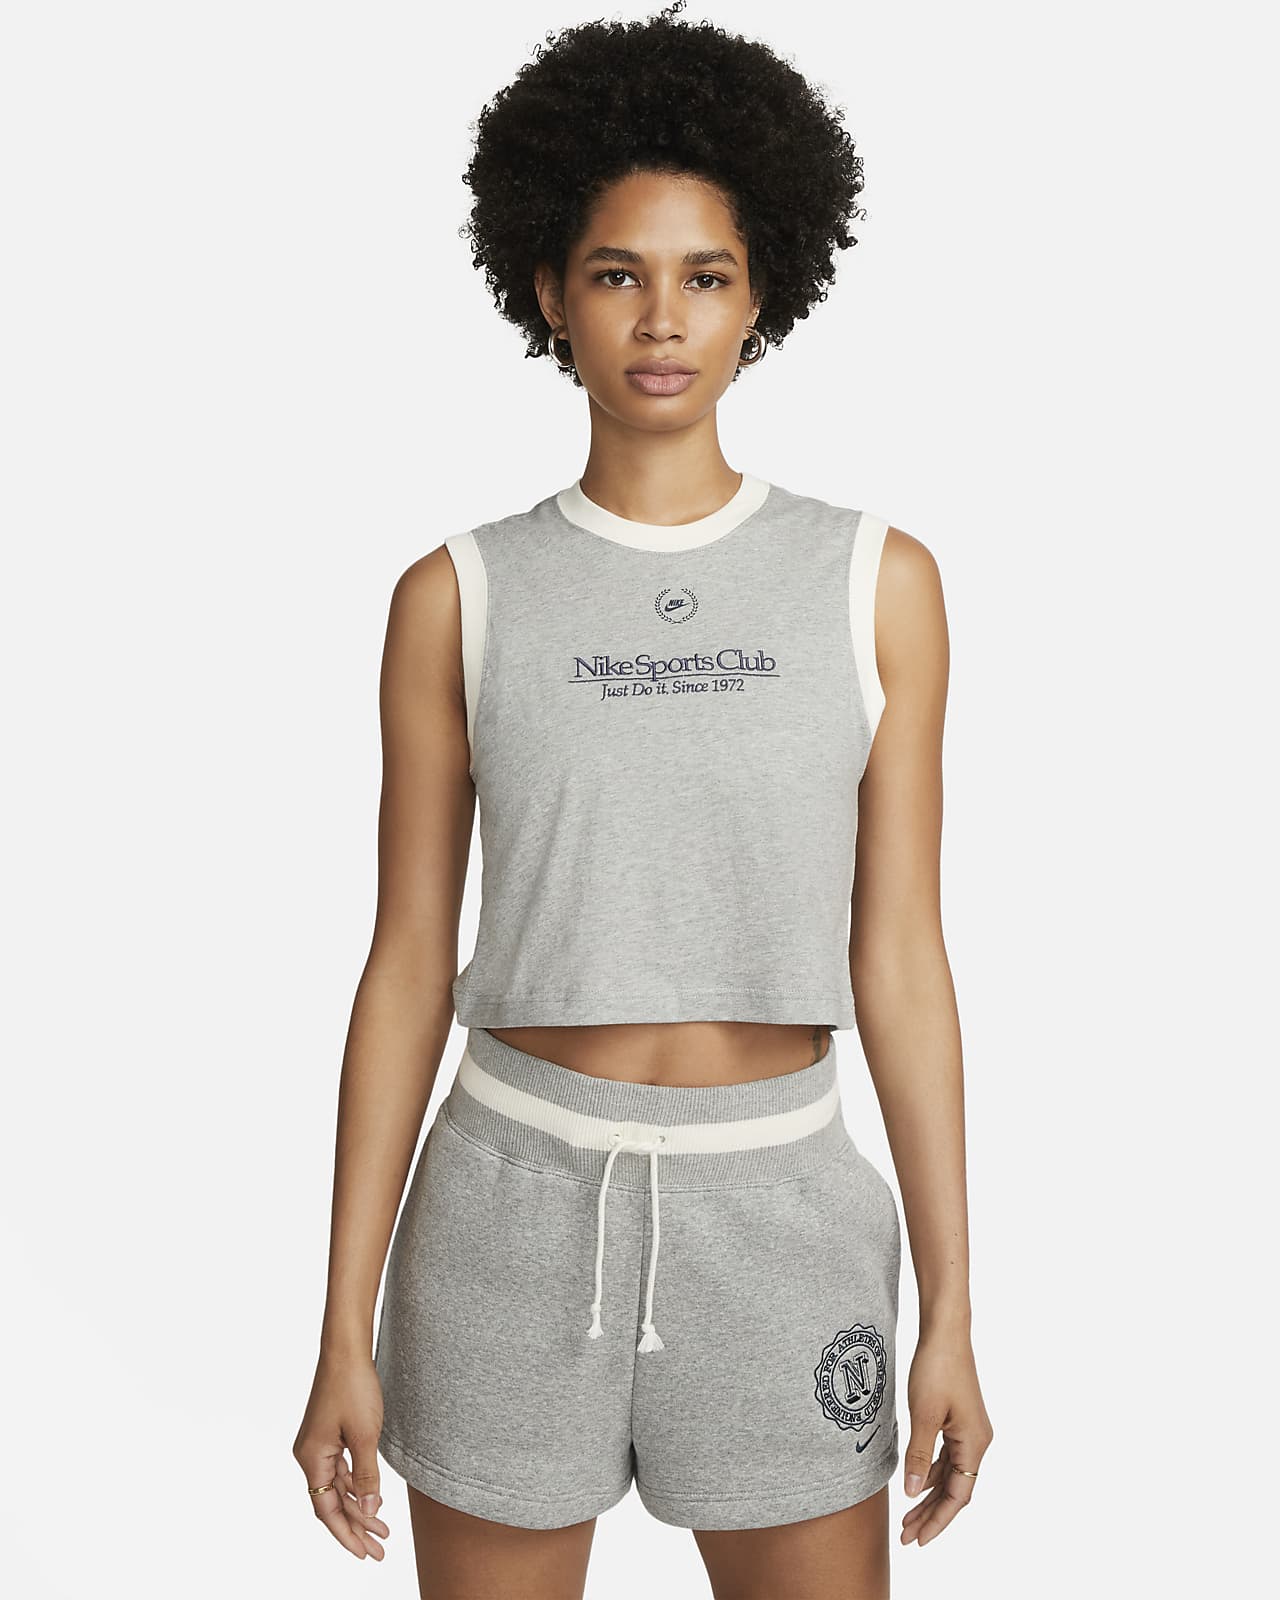 Nike Fall Athletic Tank Tops for Women